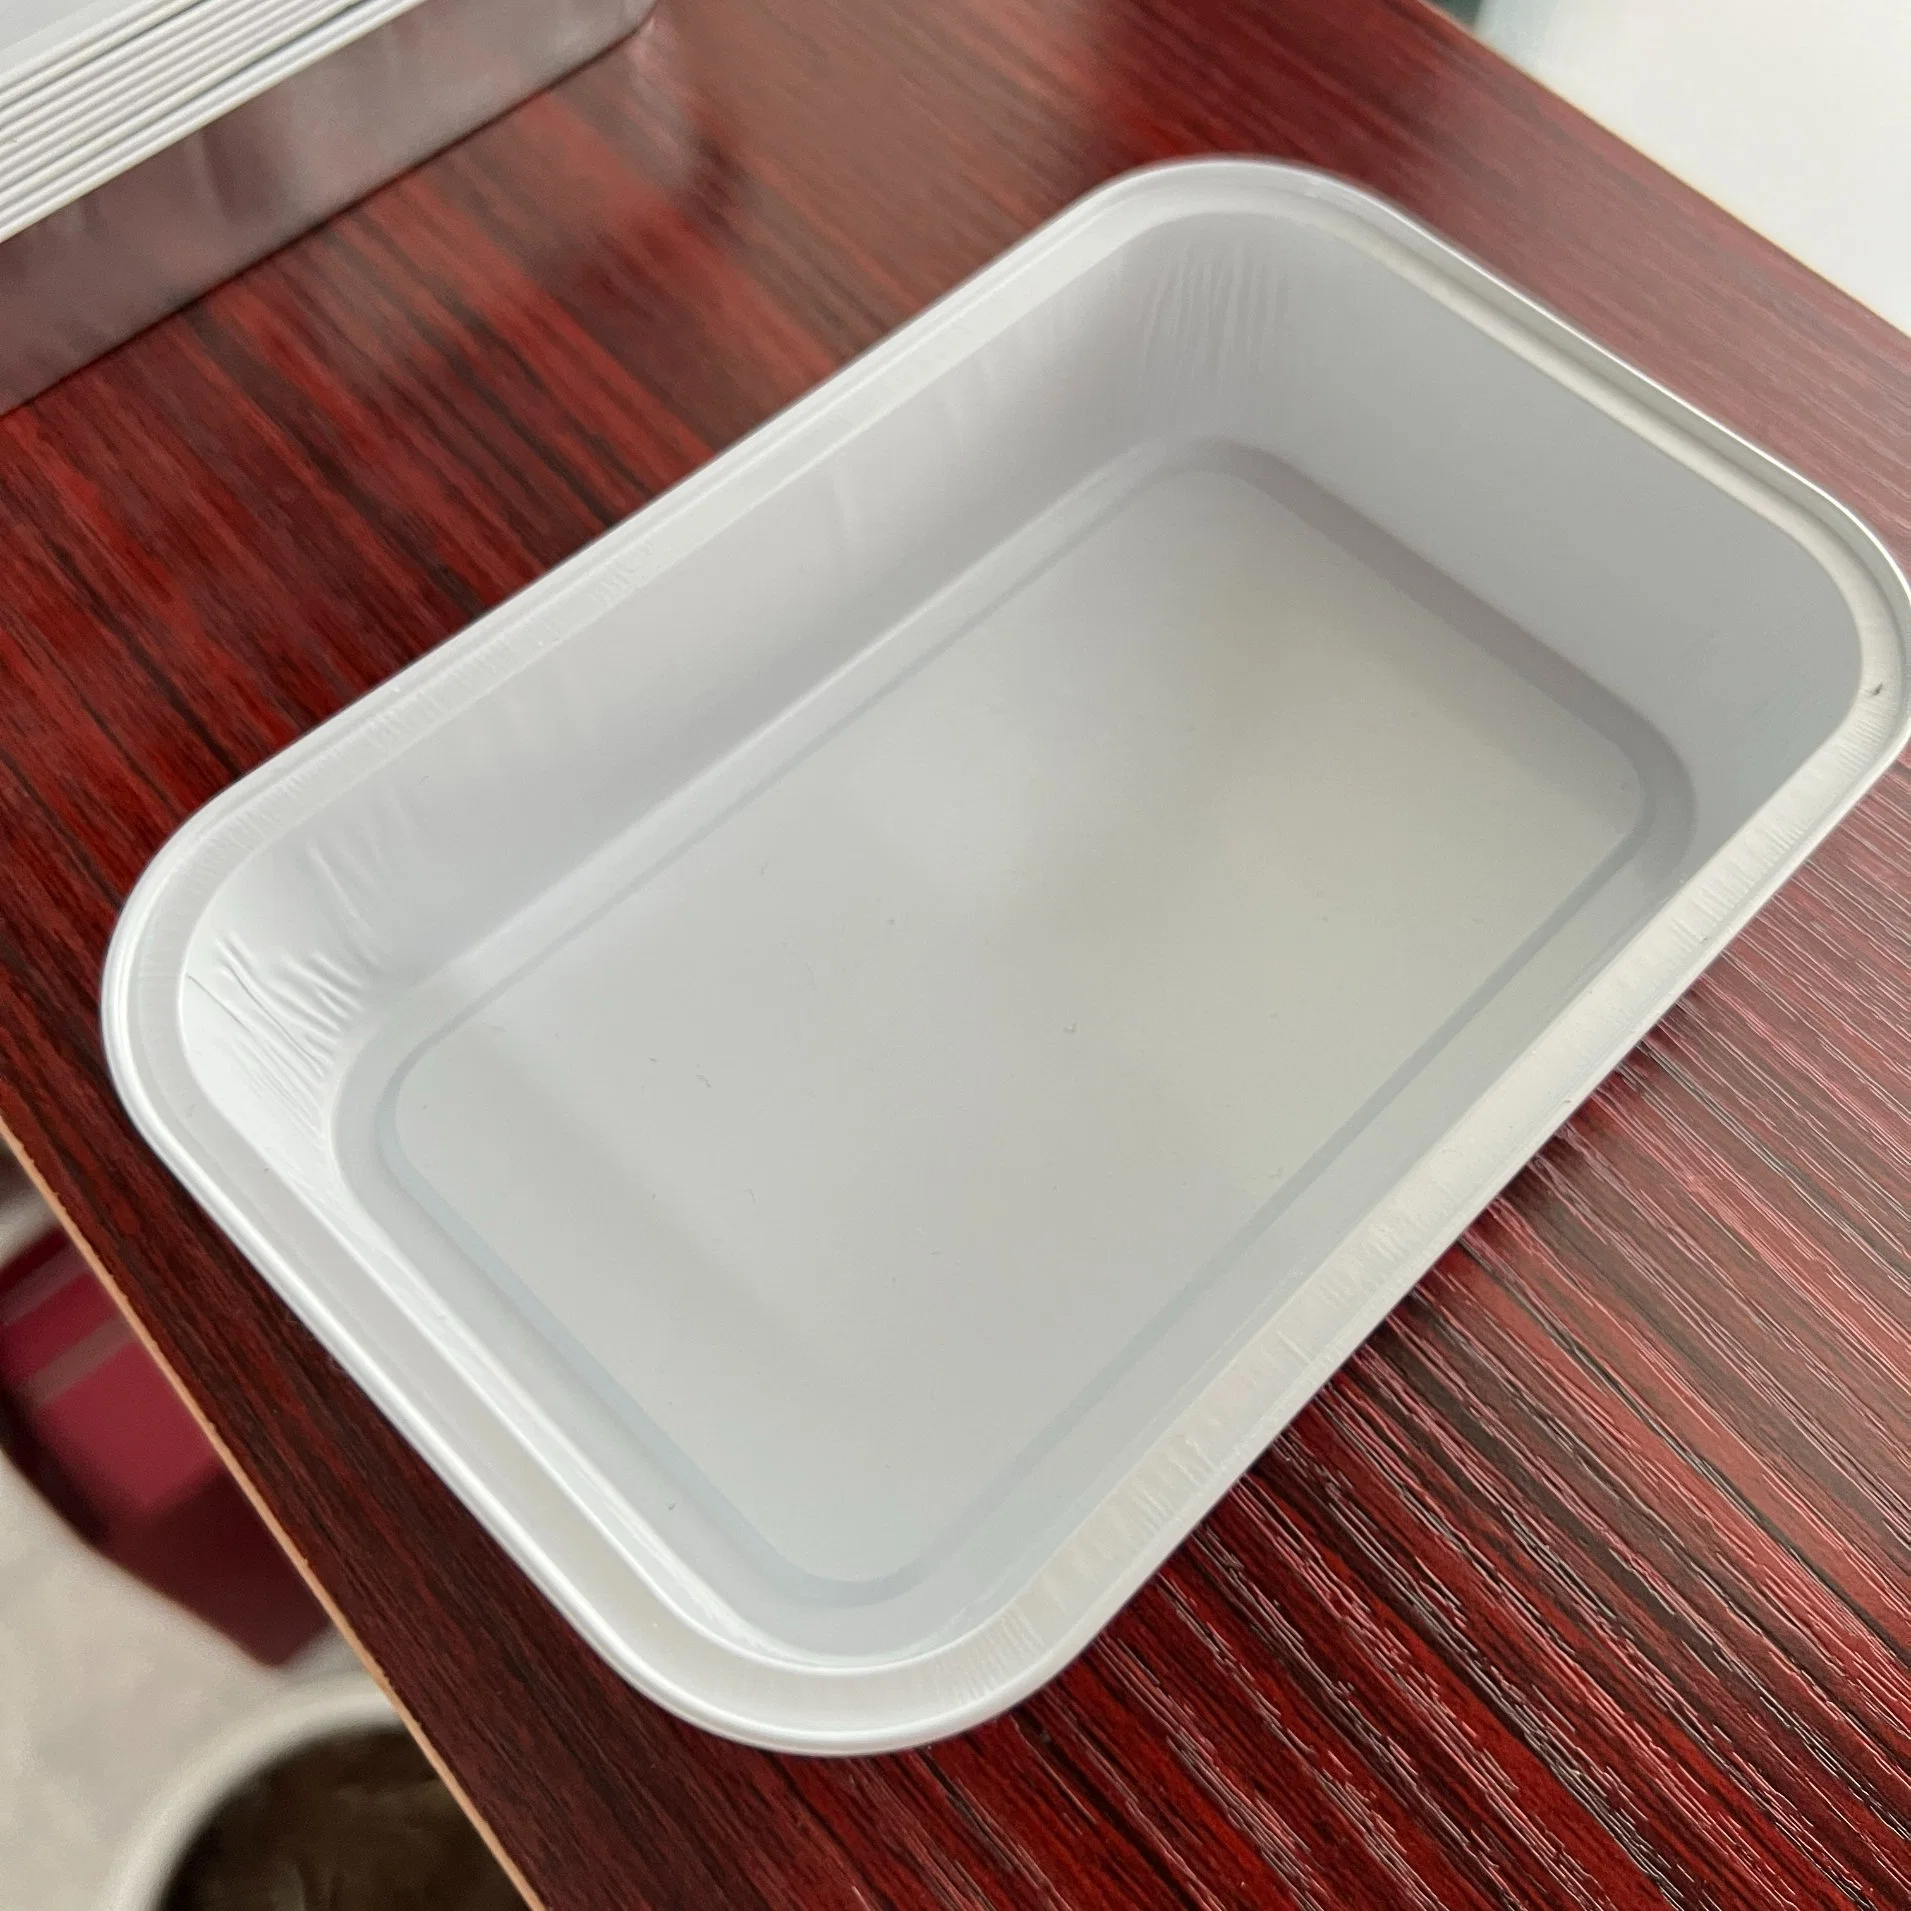 Rectangle Disposable Aluminum Foil Food Packaging Container, Fast Food Takeout Container, Lunch Carry out Box, Kitchenware